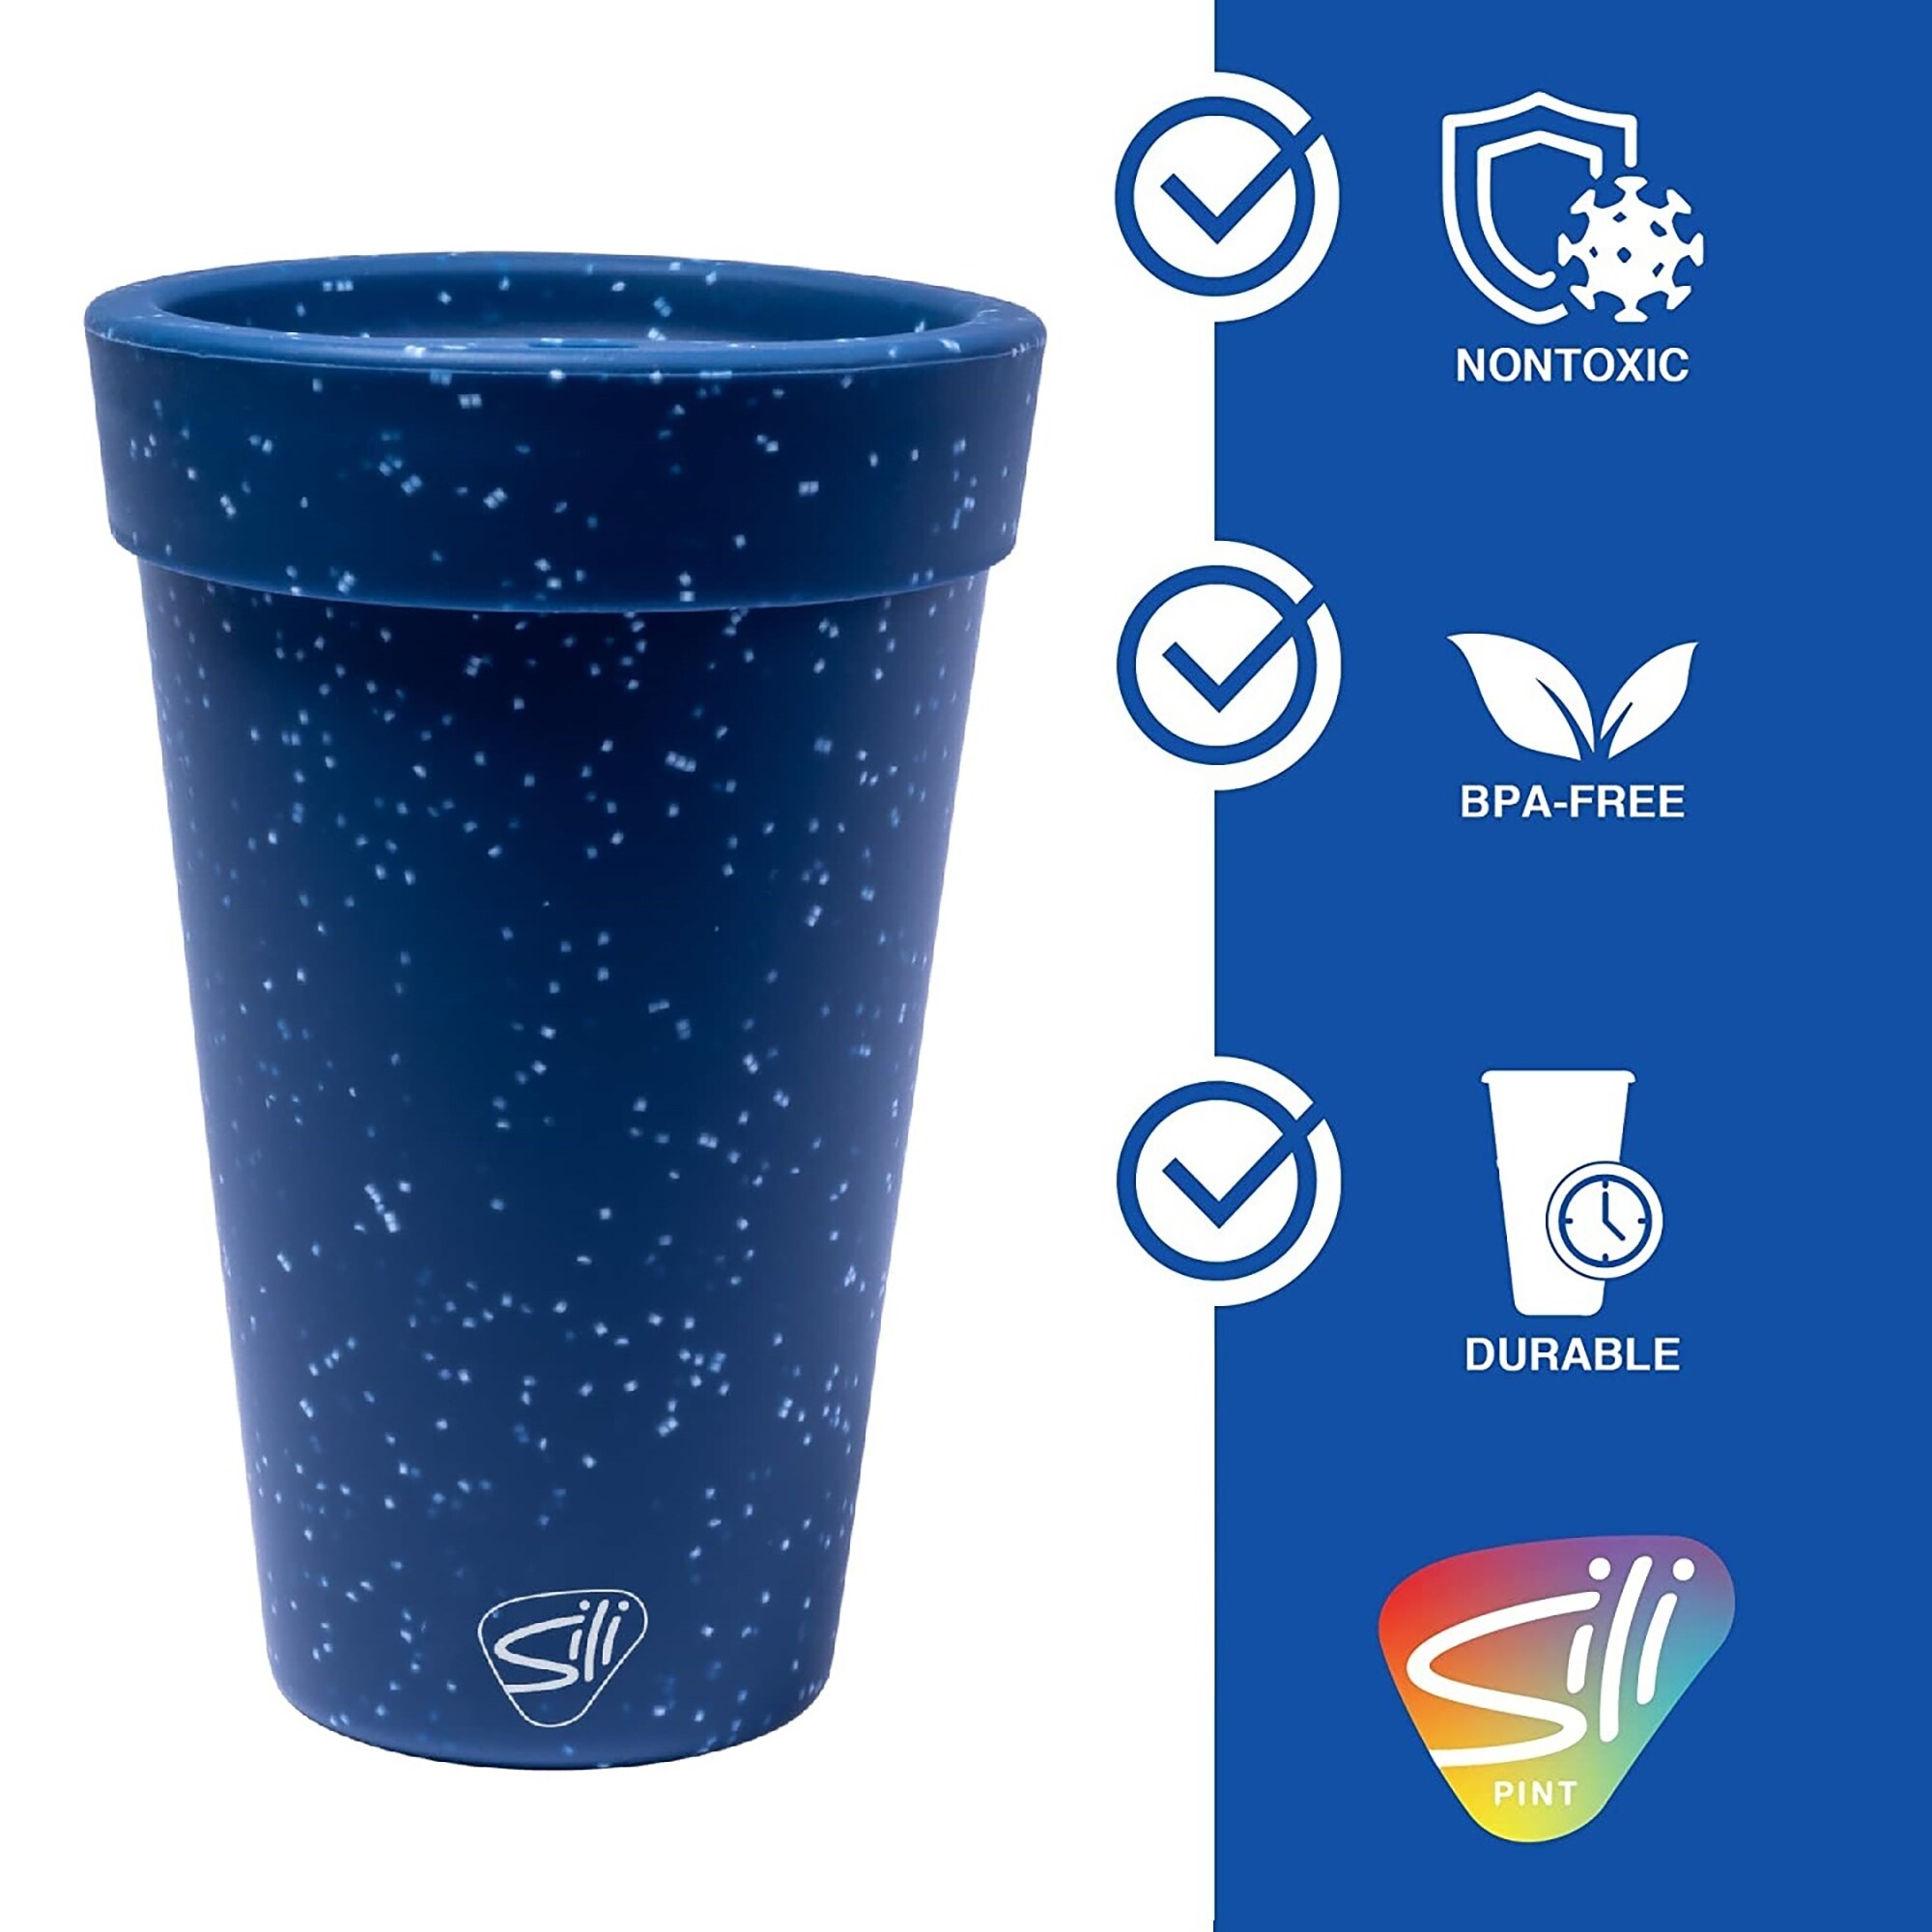 https://ak1.ostkcdn.com/images/products/is/images/direct/ab5e321135f104e2768892de4ad73bf54a458a8c/Silipint%3A-Silicone-16oz-Coffee-Tumblers%3A-2-Pack-Blue-Speckled---Unbreakable-Cups%2C-Reusable%2C-Flexible%2C-Hot-%26-Cold-Drinks.jpg